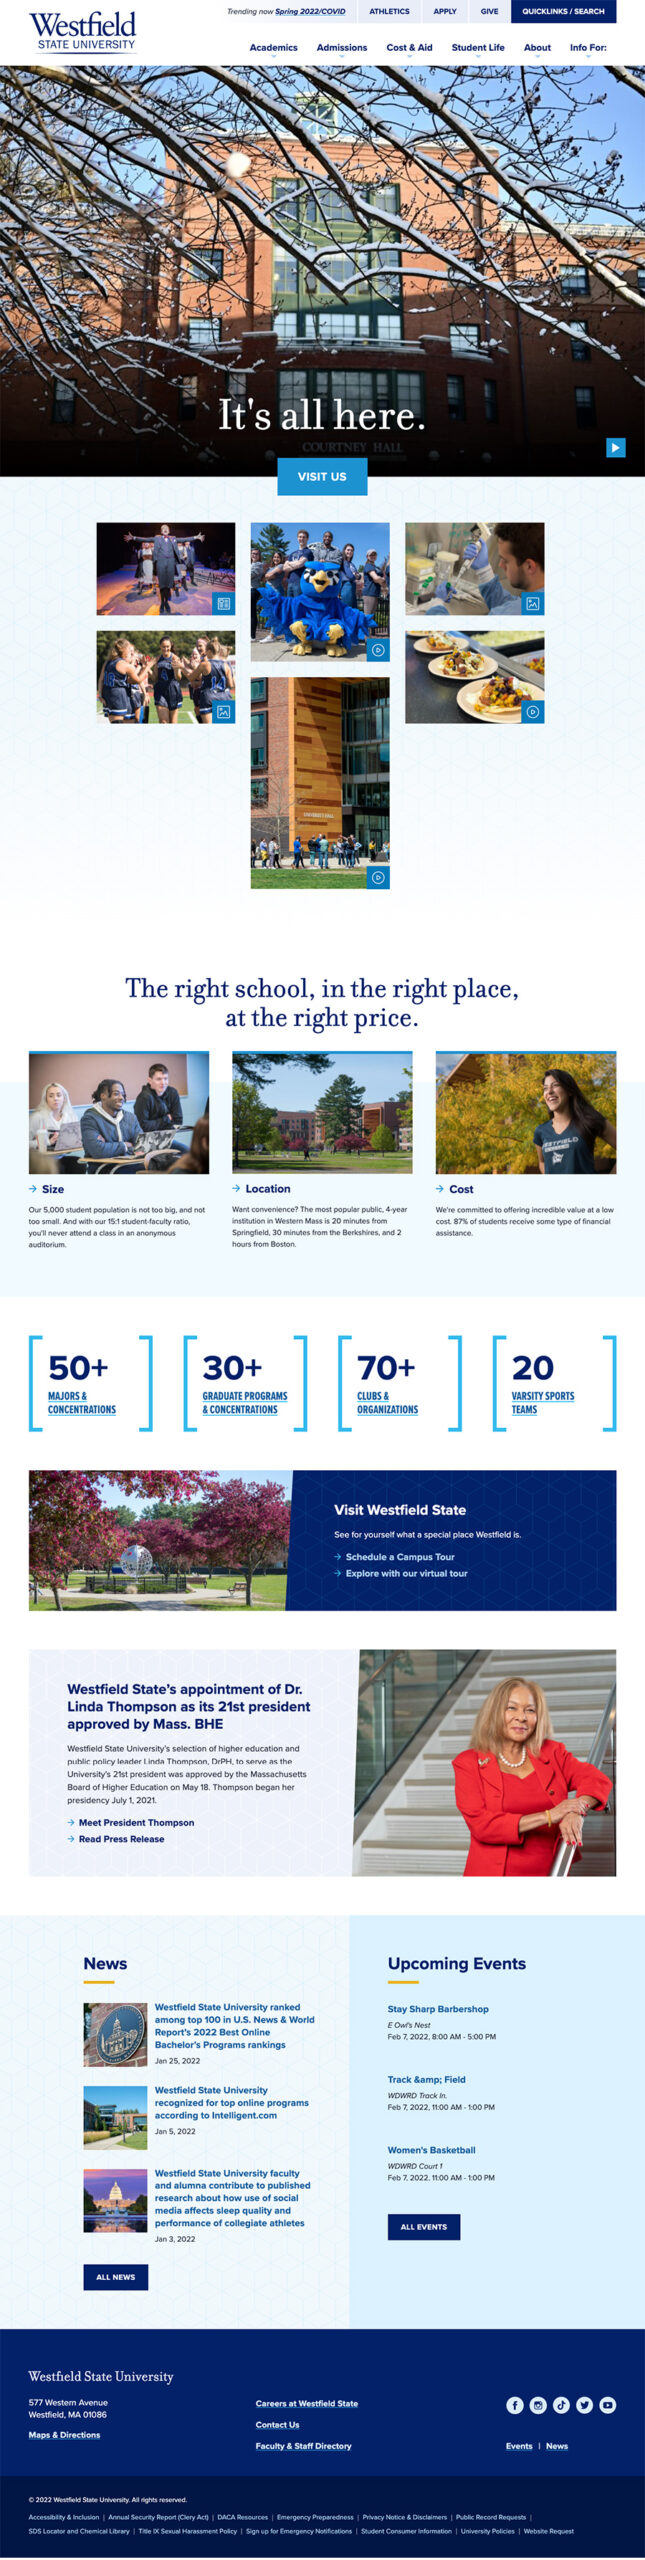 Screencapture of Westfield State University home page